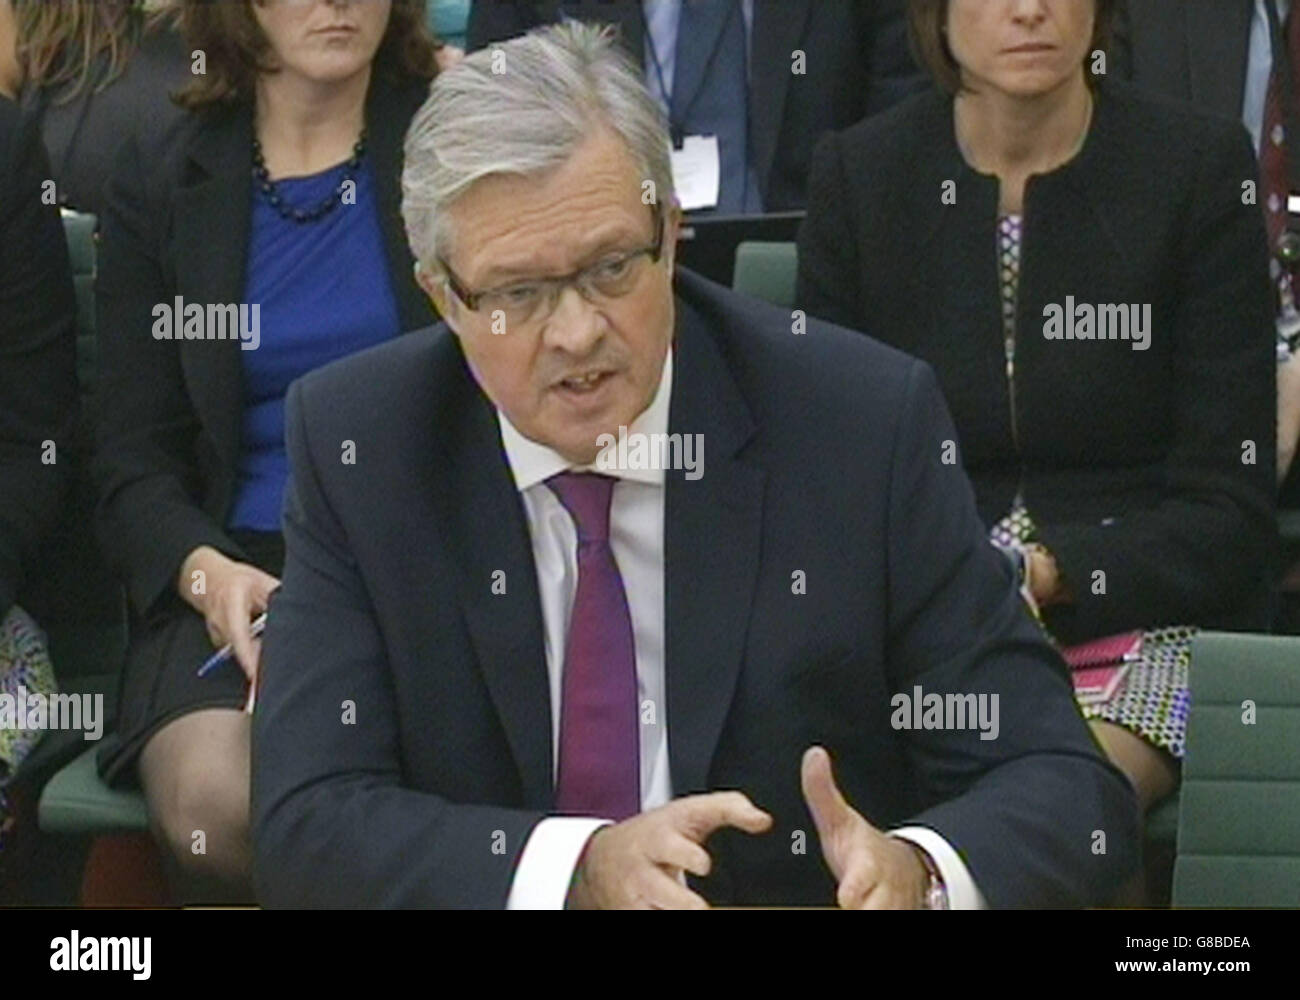 Paul Willis, the managing director of Volkswagen Group UK, answers questions during a Transport Select Committee on the VW diesel emissions scandal, at Portcullis House, Westminster. Stock Photo